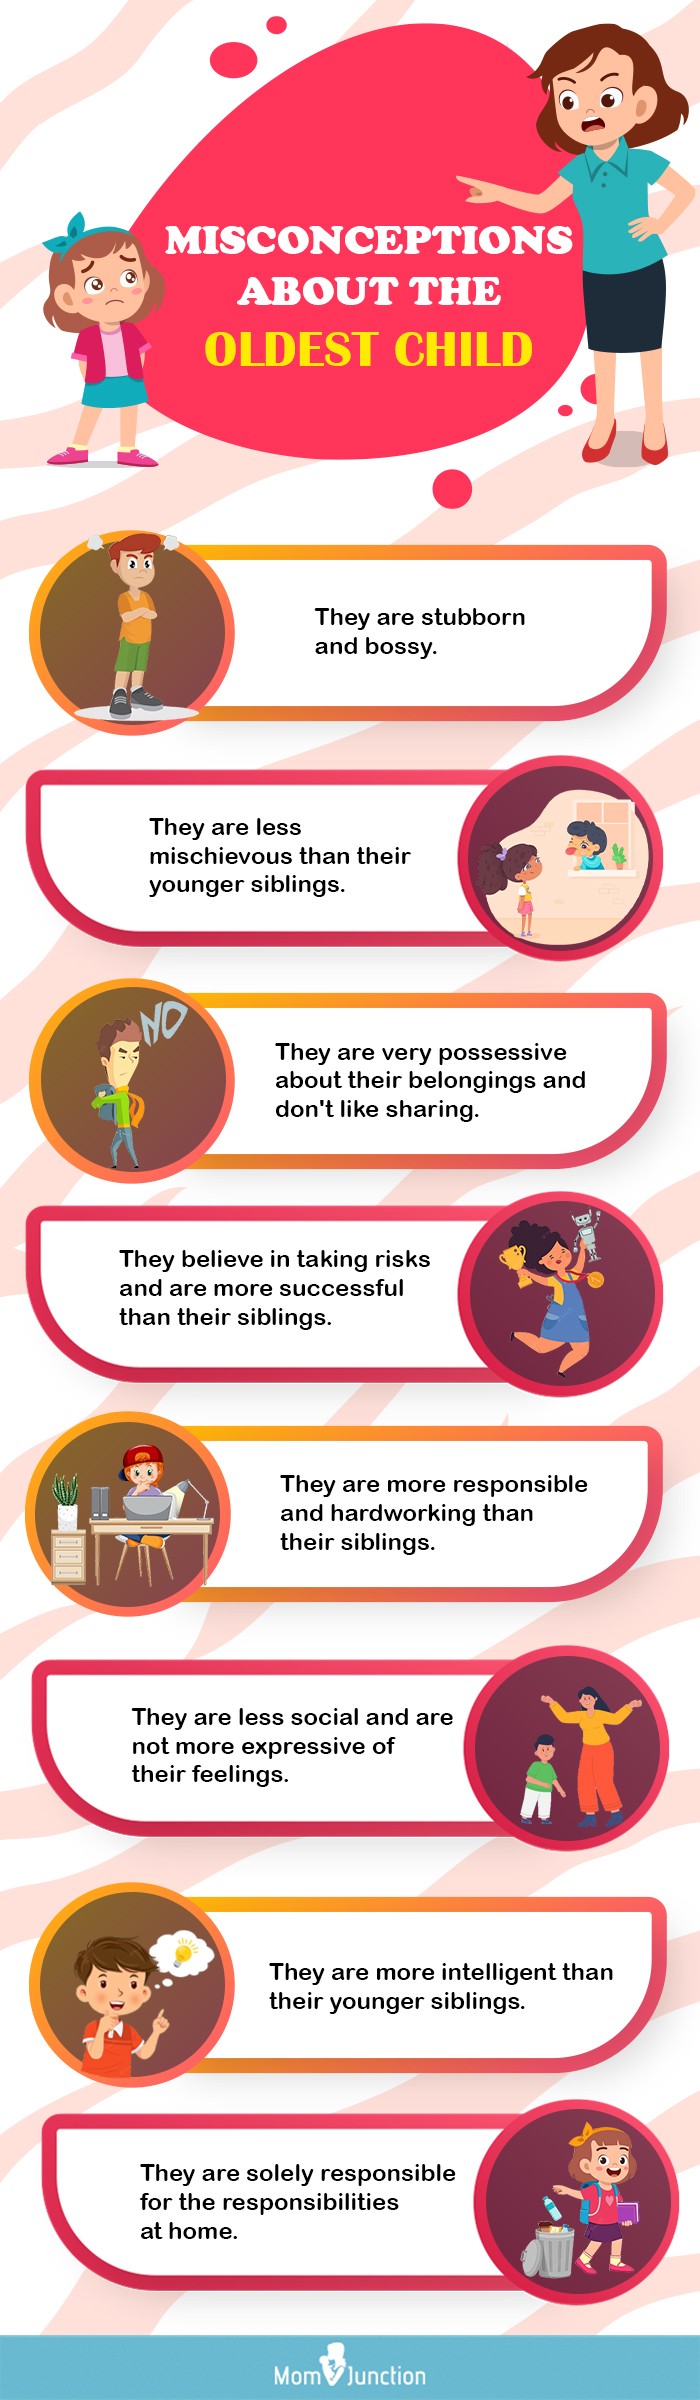 misconceptions about the oldest child (infographic)